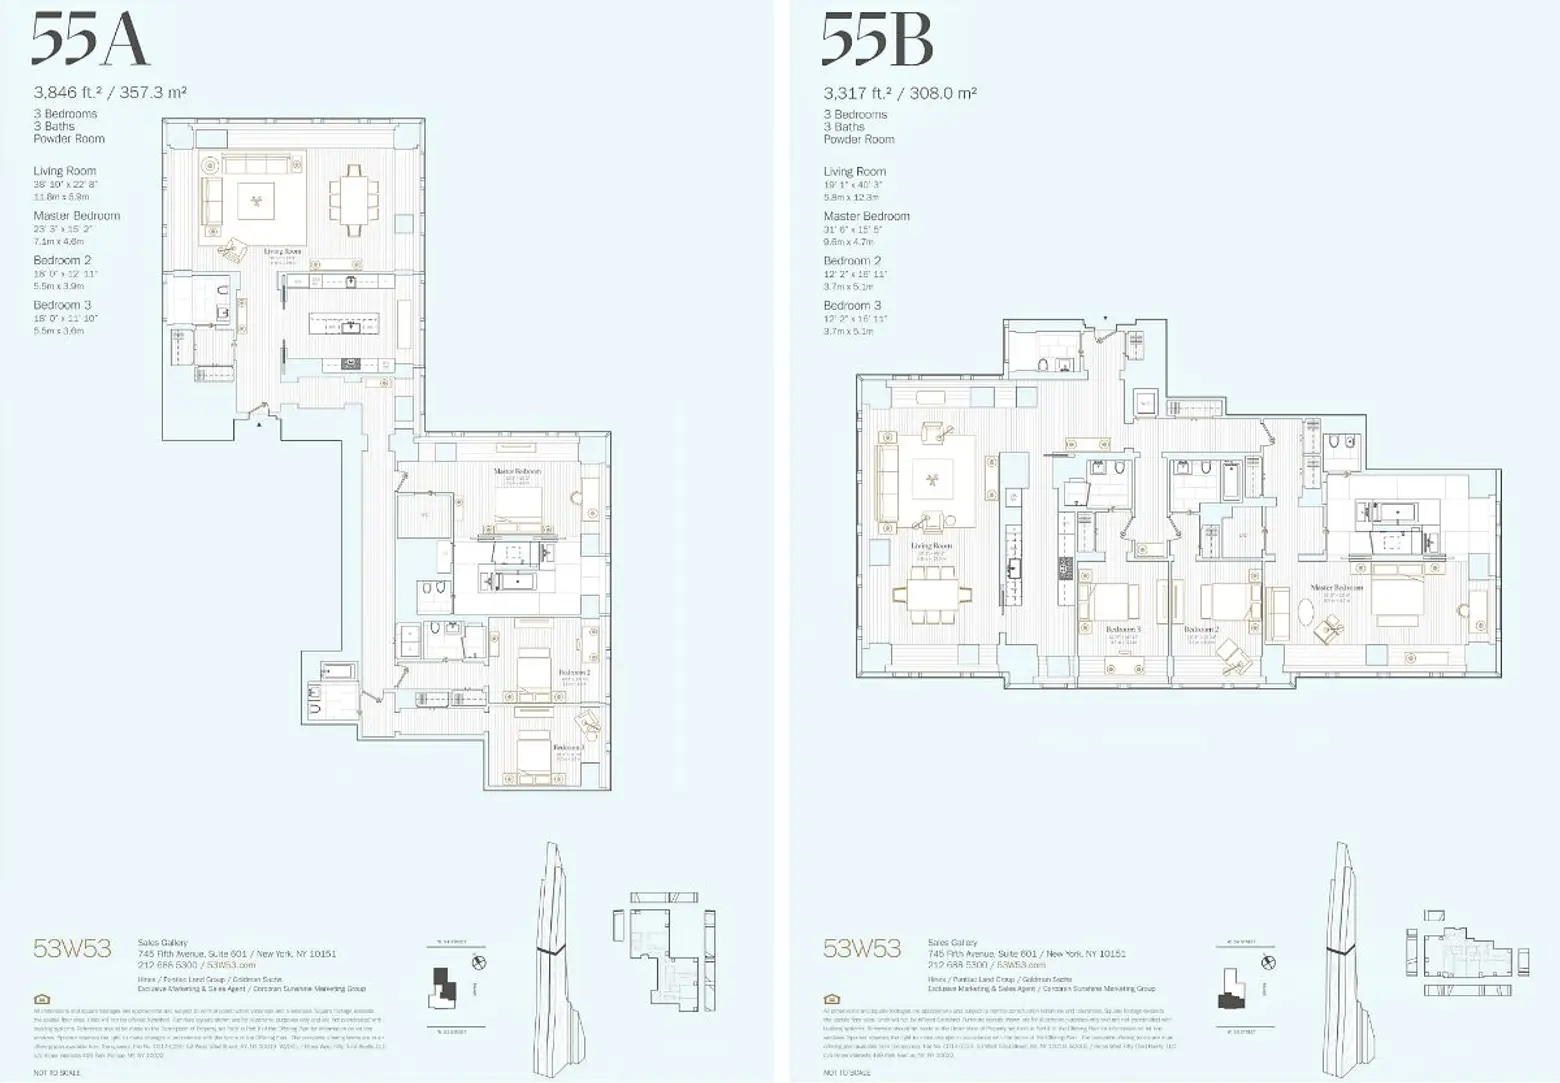 MoMA Tower floorplans, 53W53, 53 West 53rd Street, Jean Nouvel, NYC starchitecture